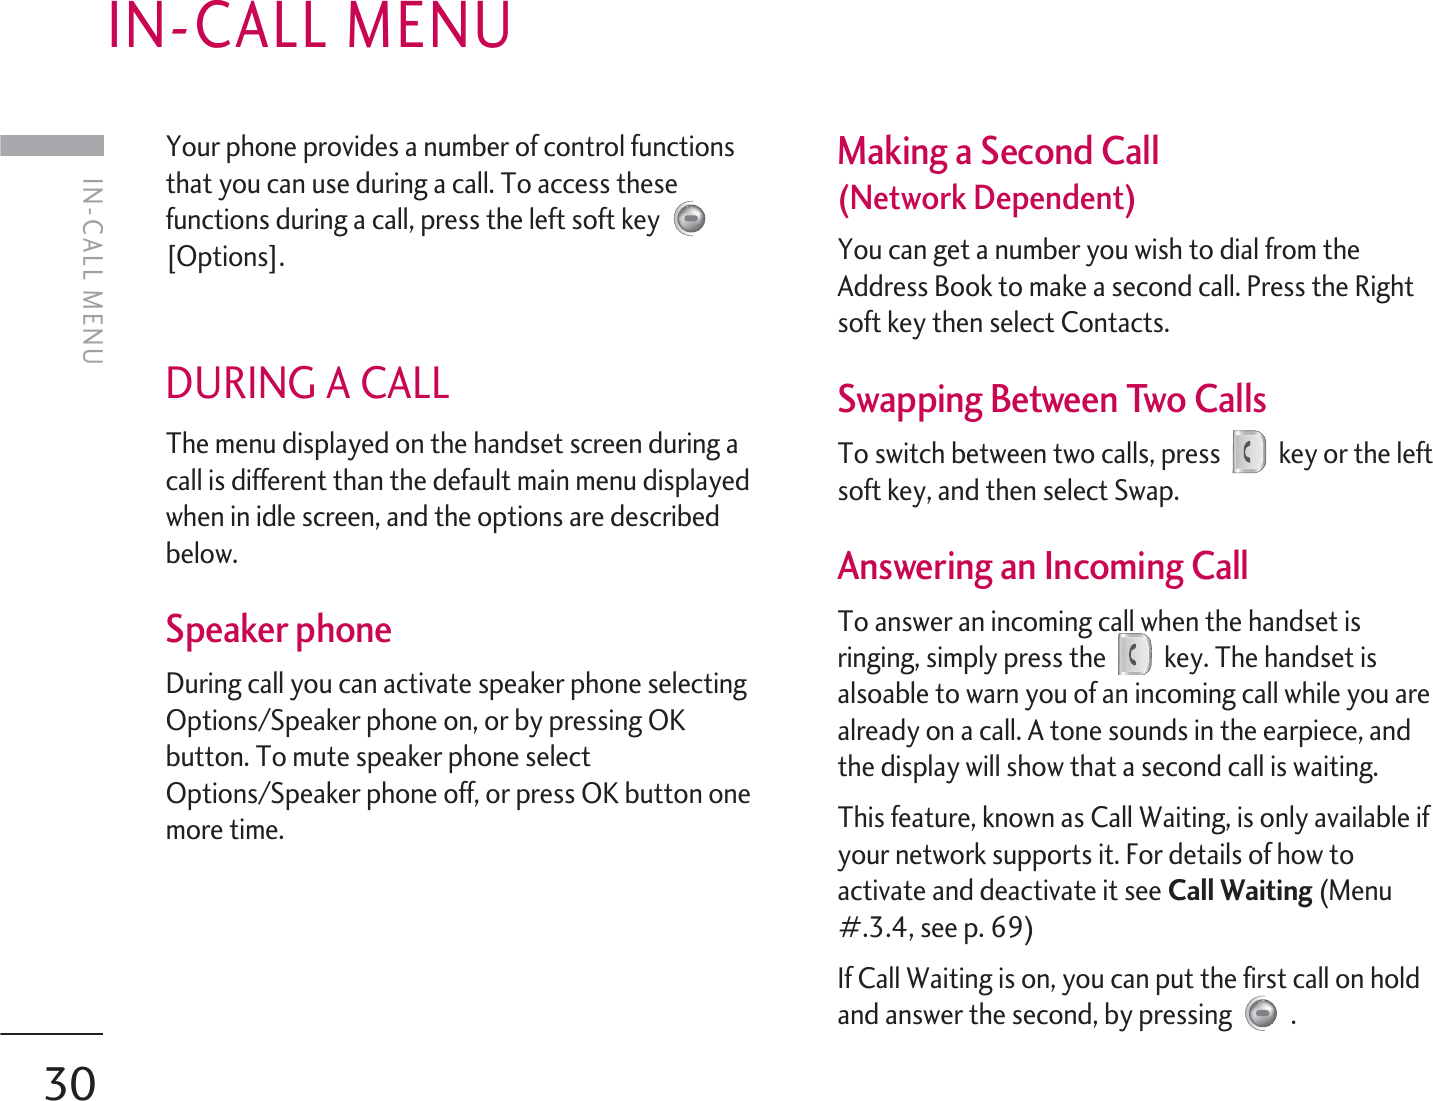 30Your phone provides a number of control functionsthat you can use during a call. To access thesefunctions during a call, press the left soft key [Options].DURING A CALL The menu displayed on the handset screen during acall is different than the default main menu displayedwhen in idle screen, and the options are describedbelow.Speaker phone During call you can activate speaker phone selectingOptions/Speaker phone on, or by pressing OKbutton. To mute speaker phone selectOptions/Speaker phone off, or press OK button onemore time.Making a Second Call (Network Dependent)You can get a number you wish to dial from theAddress Book to make a second call. Press the Rightsoft key then select Contacts.Swapping Between Two Calls To switch between two calls, press key or the leftsoft key, and then select Swap.Answering an Incoming Call To answer an incoming call when the handset isringing, simply press the key. The handset isalsoable to warn you of an incoming call while you arealready on a call. A tone sounds in the earpiece, andthe display will show that a second call is waiting.This feature, known as Call Waiting, is only available ifyour network supports it. For details of how toactivate and deactivate it see Call Waiting (Menu#.3.4, see p. 69)If Call Waiting is on, you can put the first call on holdand answer the second, by pressing  .IN-CALL MENUIN-CALL MENU